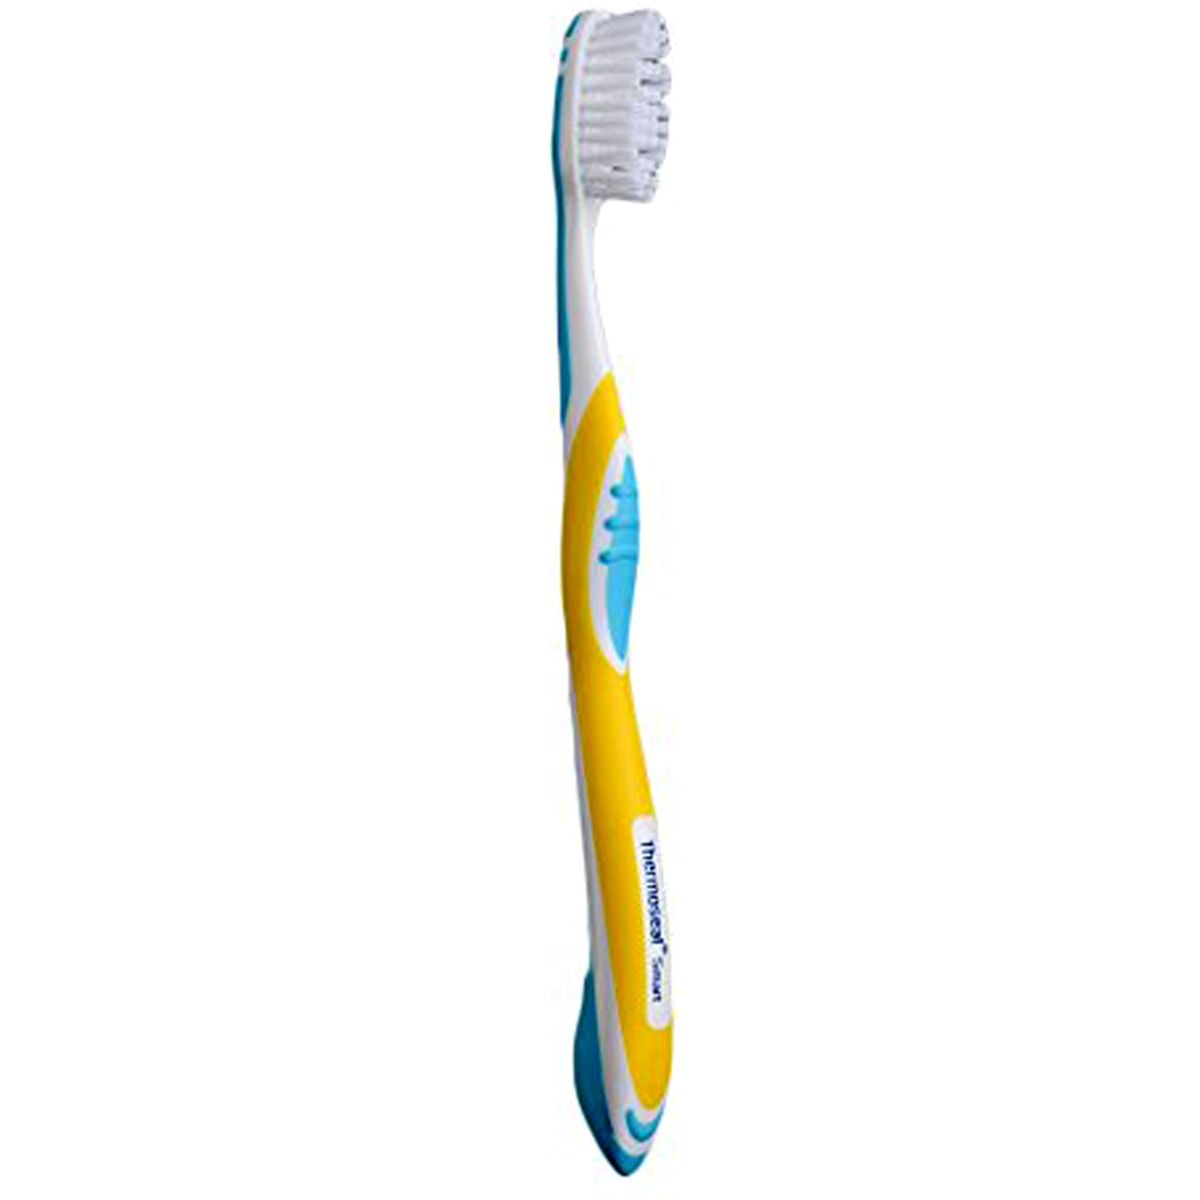 Buy Thermoseal Smart Toothbrush, 1 Count Online